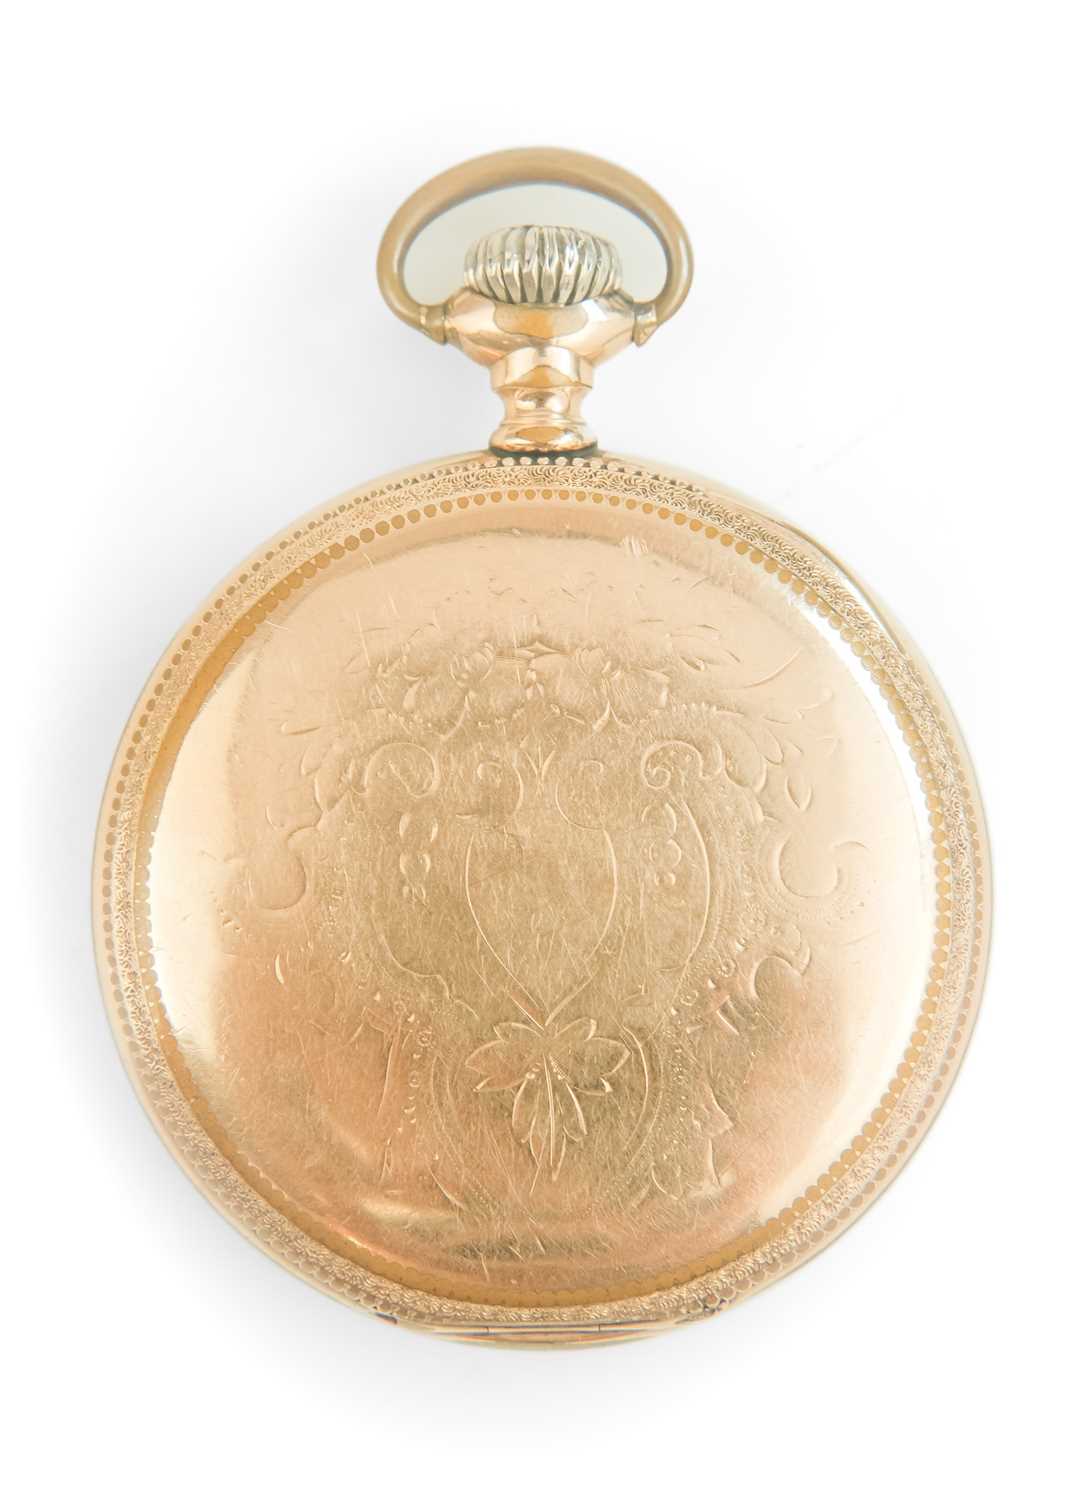 WALTHAM - A rose gold plated crown wind open face pocket watch. - Image 6 of 8